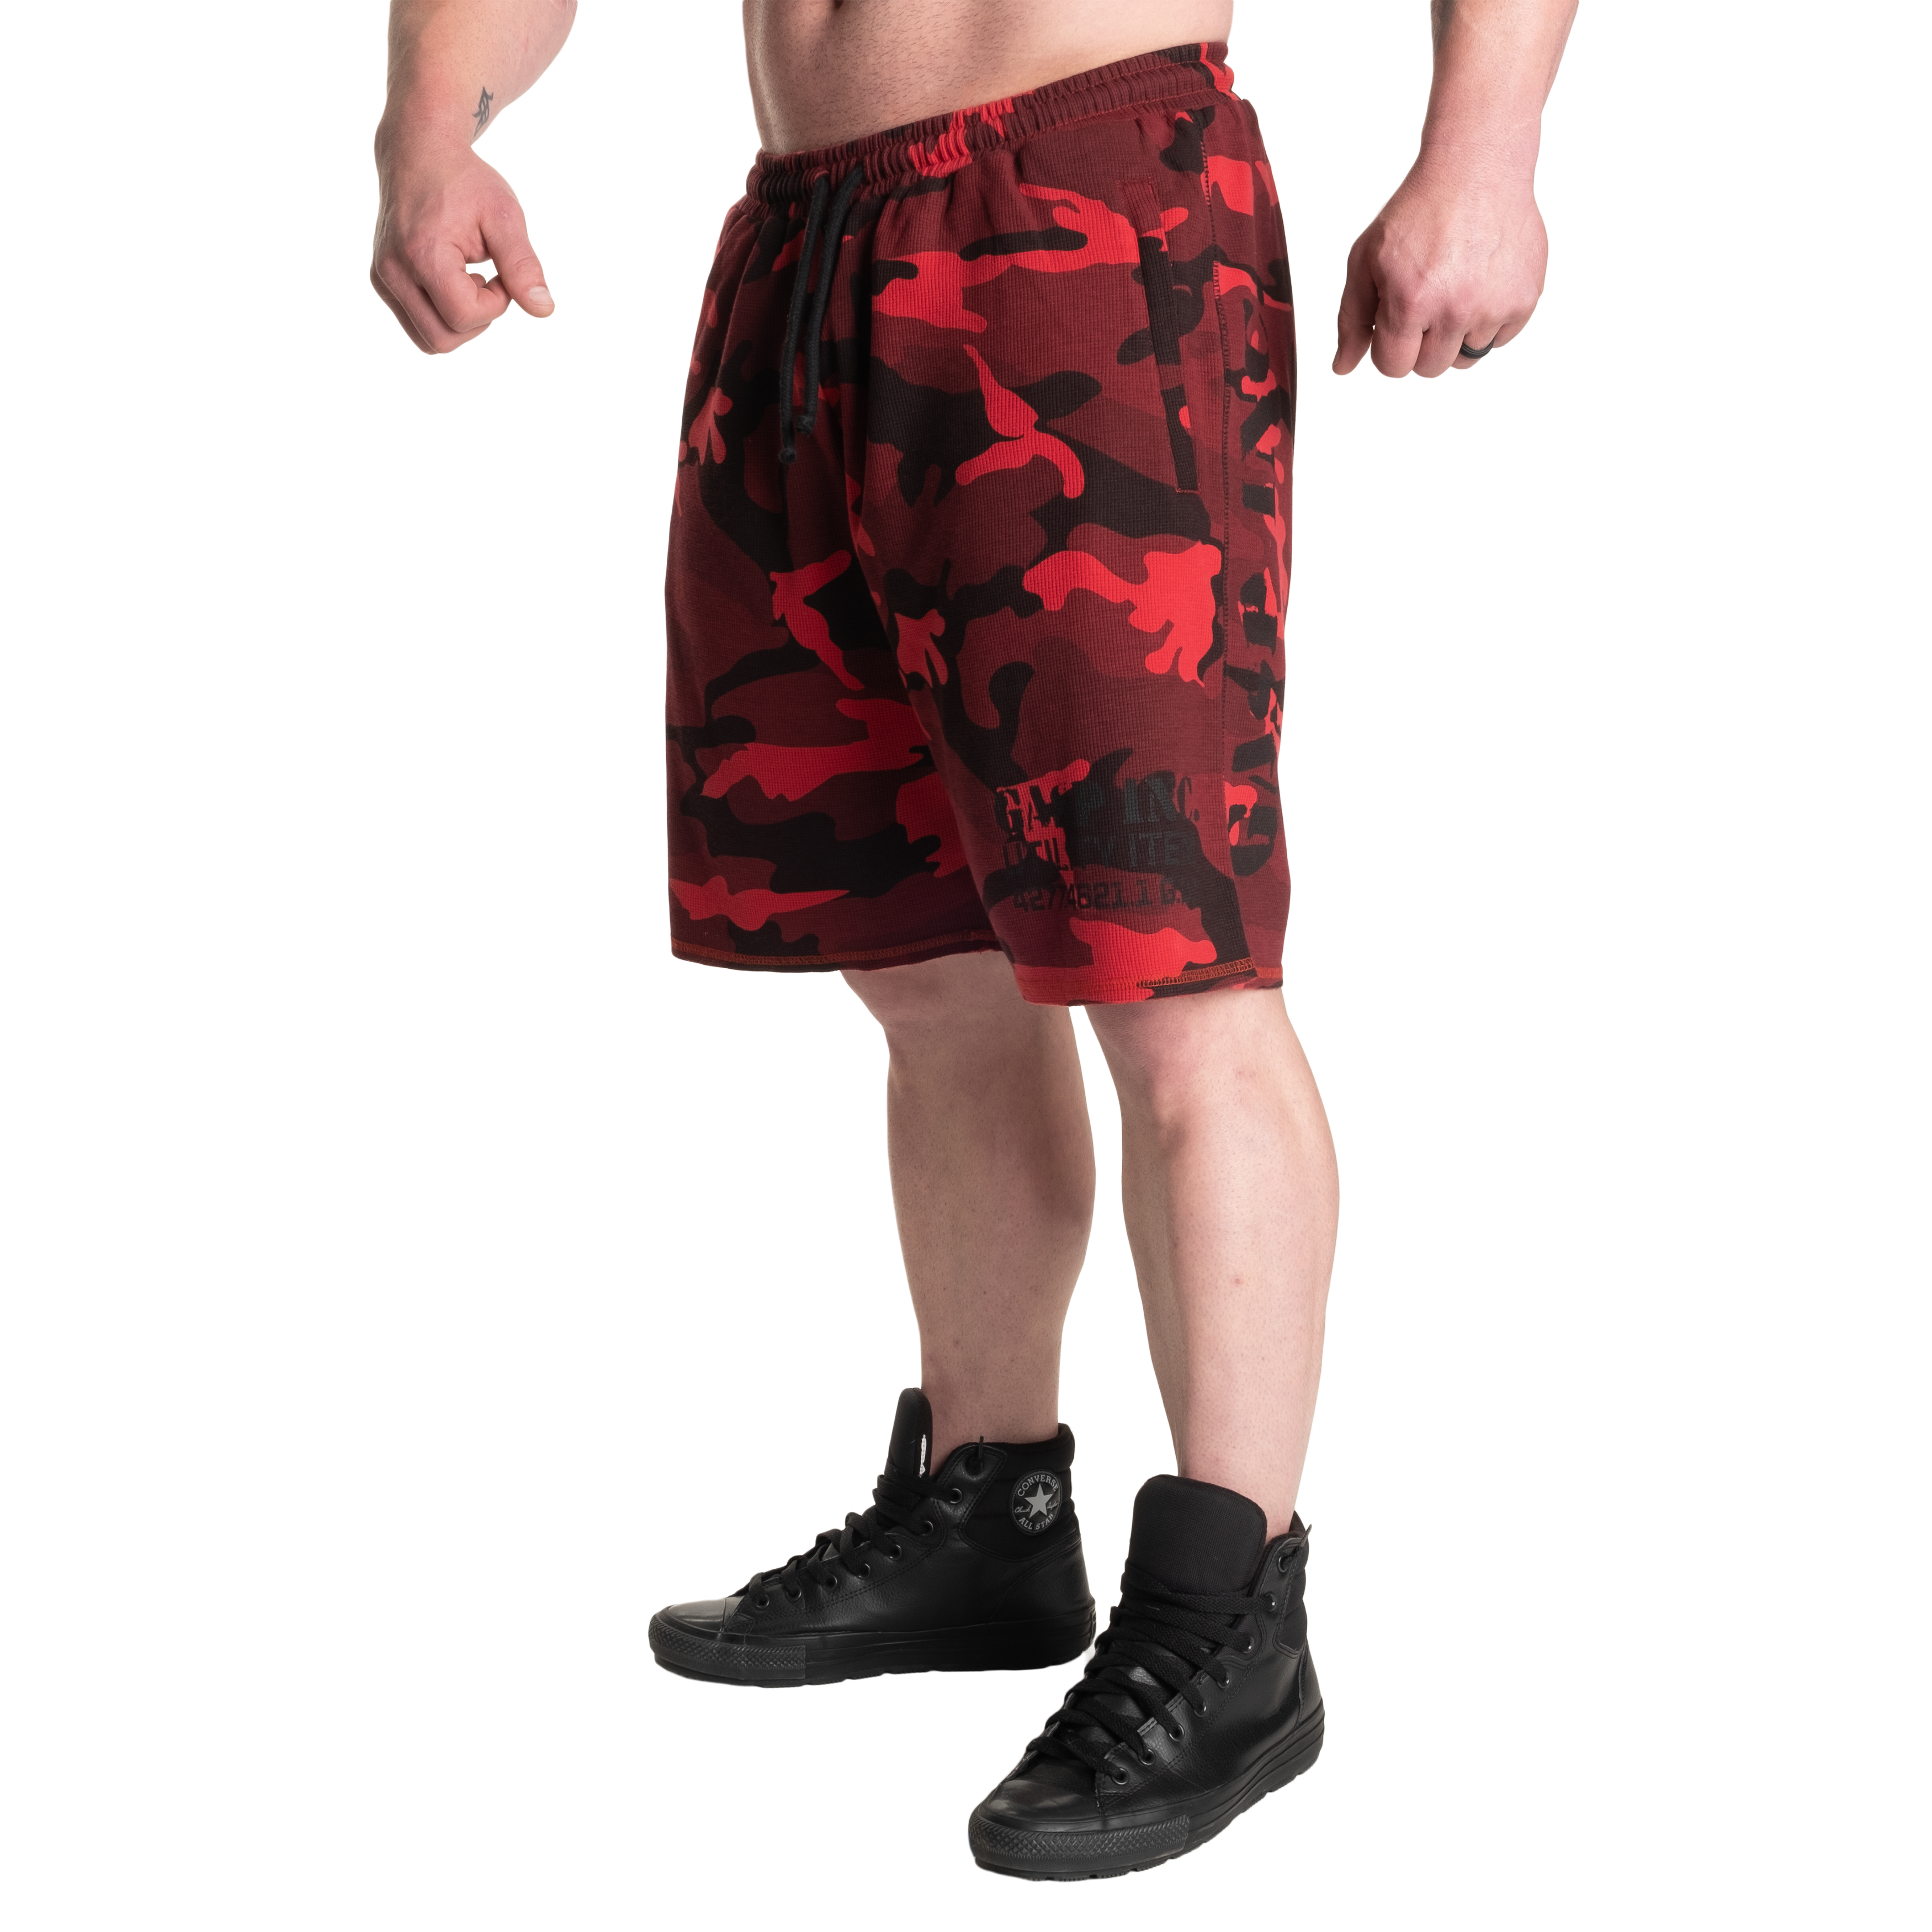 Thermal Shorts, Red Camo - MUSL BUDDIES